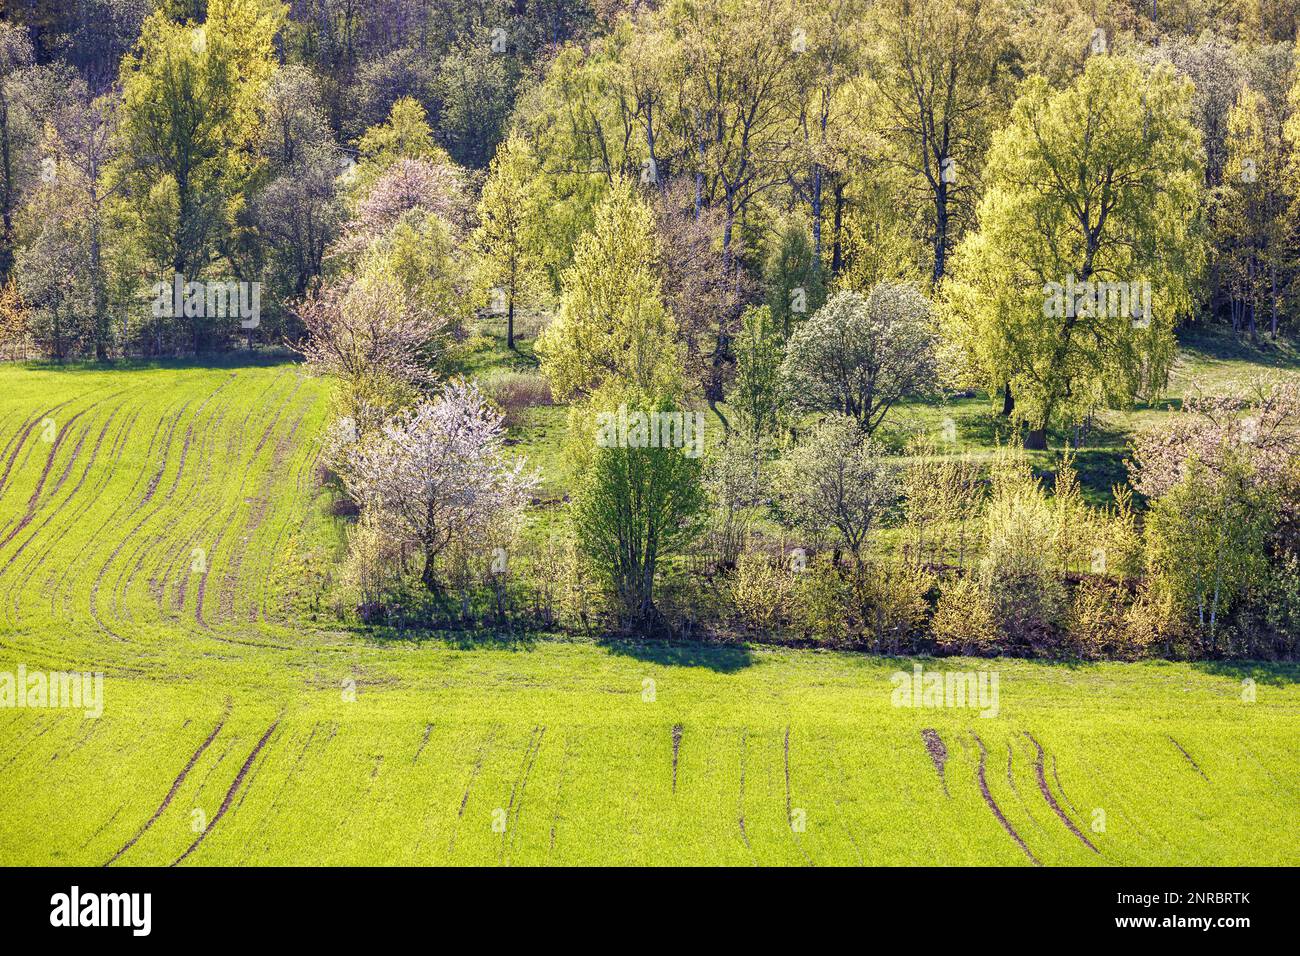 Lush green trees by a sown field in the countryside at spring Stock Photo